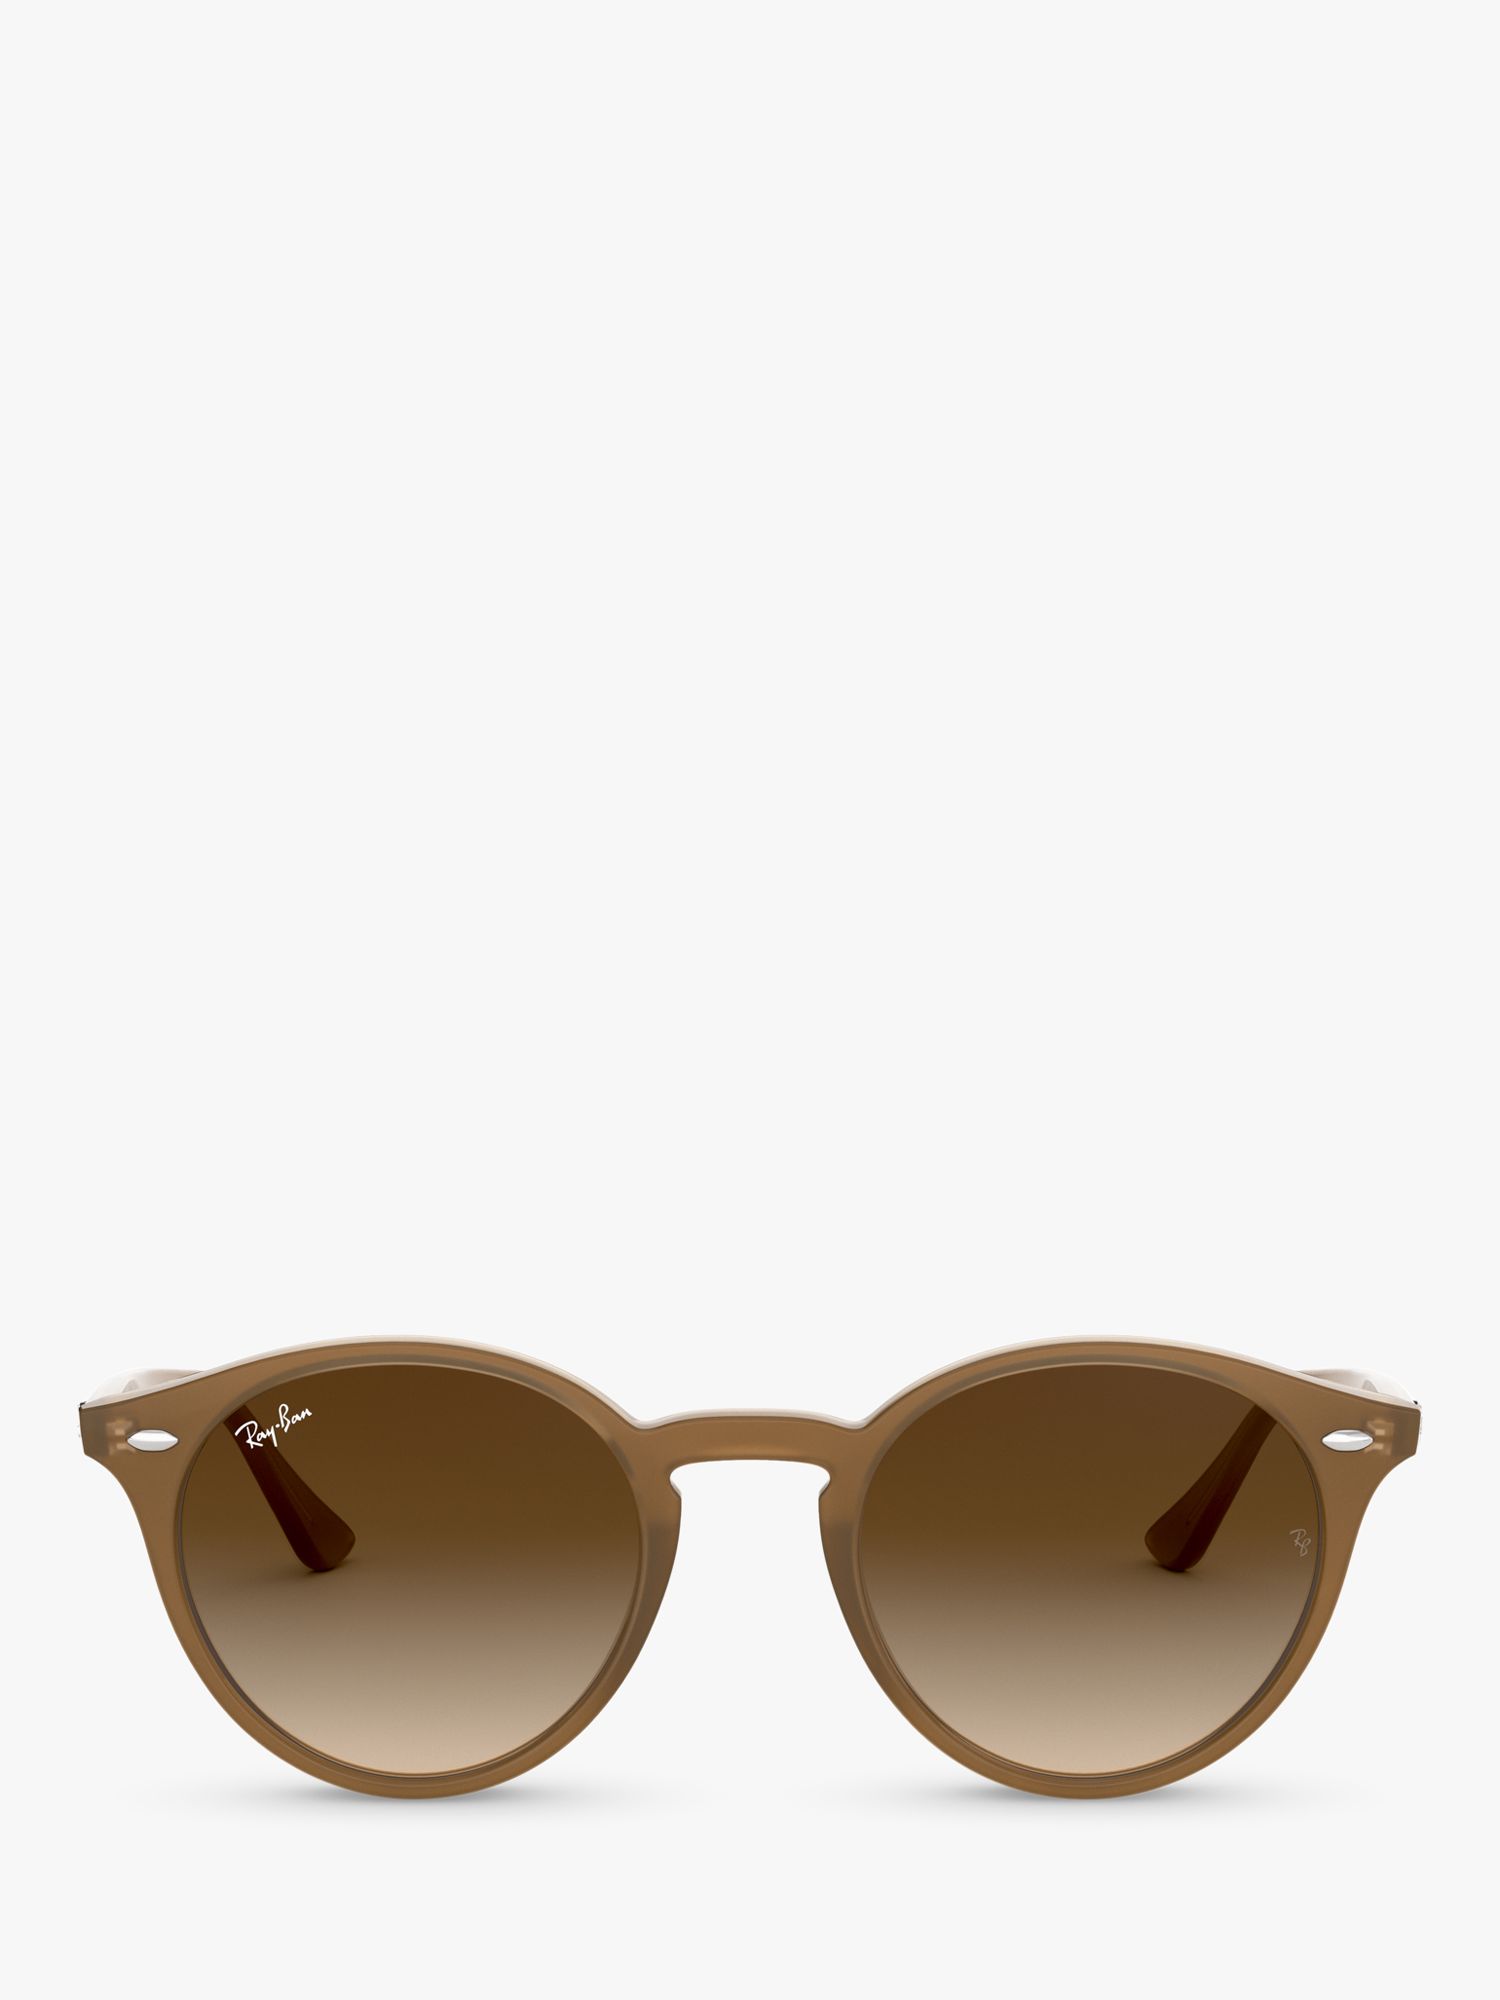 Buy Ray-Ban RB2180 Round Framed Sunglasses Online at johnlewis.com